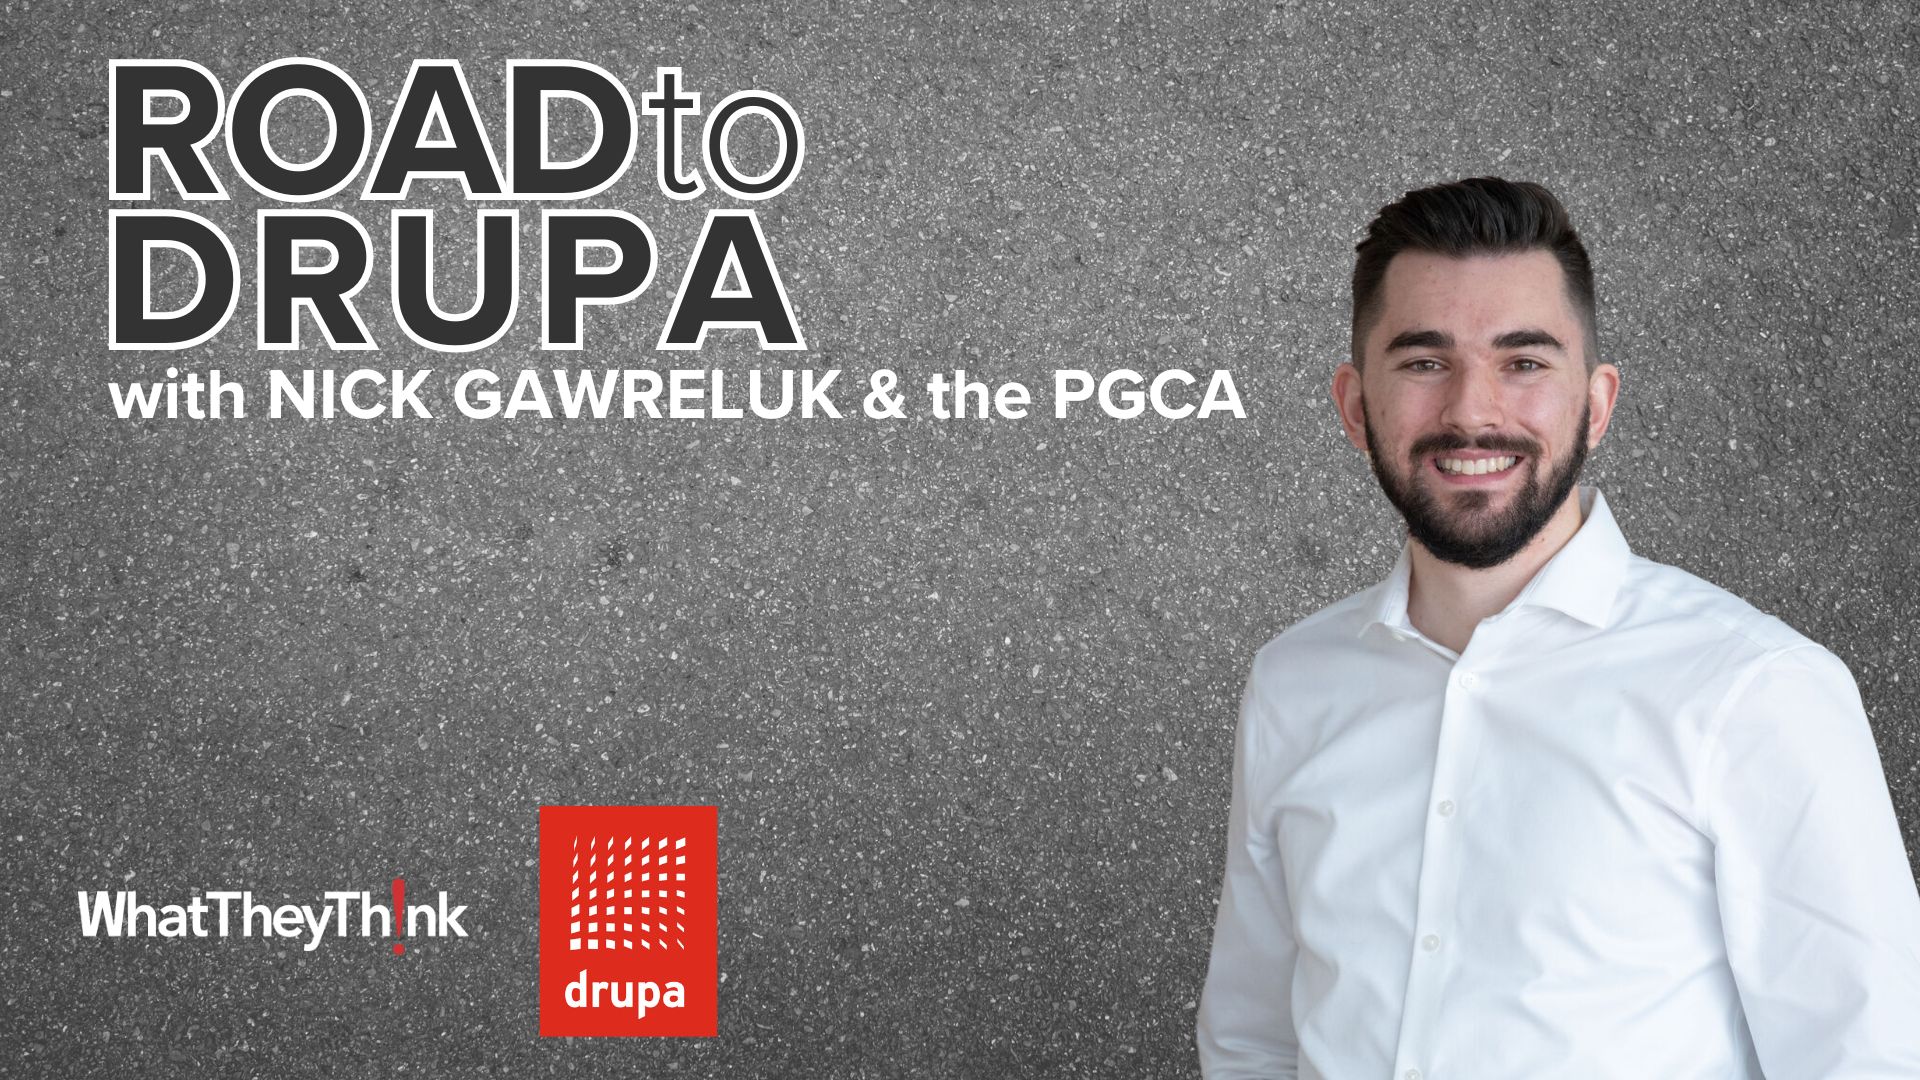 Video preview: The Road to drupa: PGCA